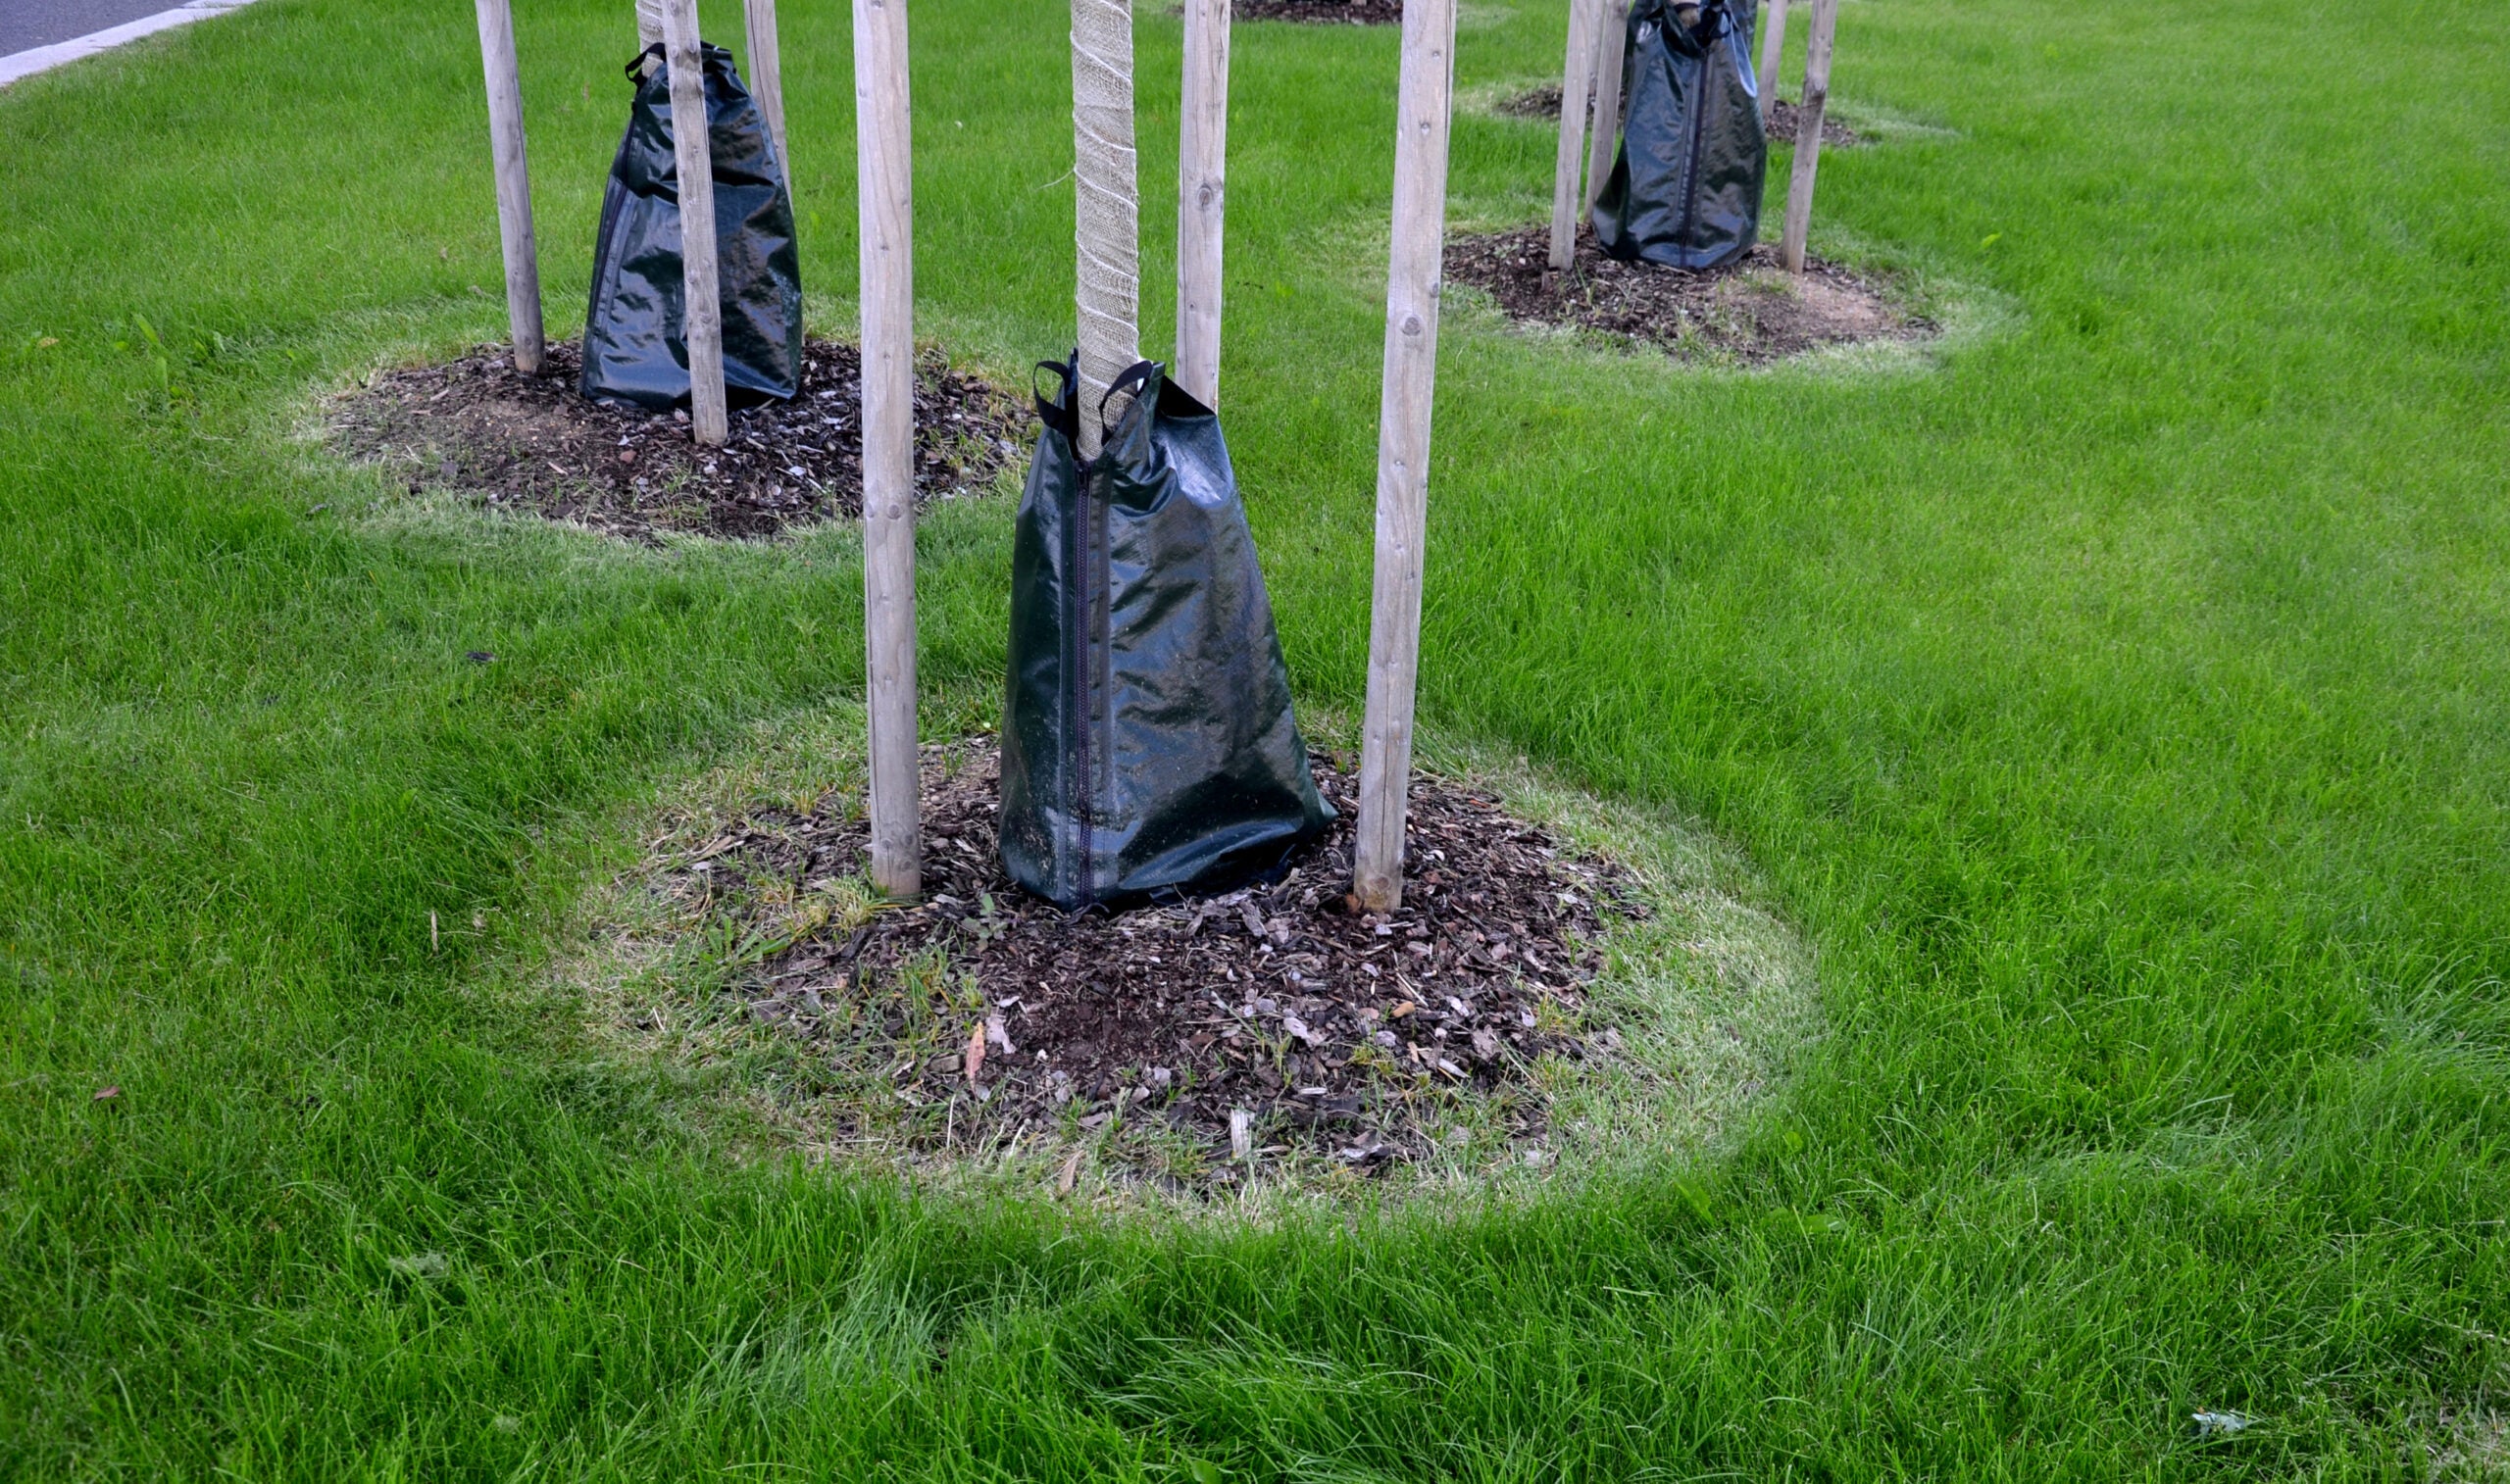 irrigated plastic bags around the trees save water and regularly